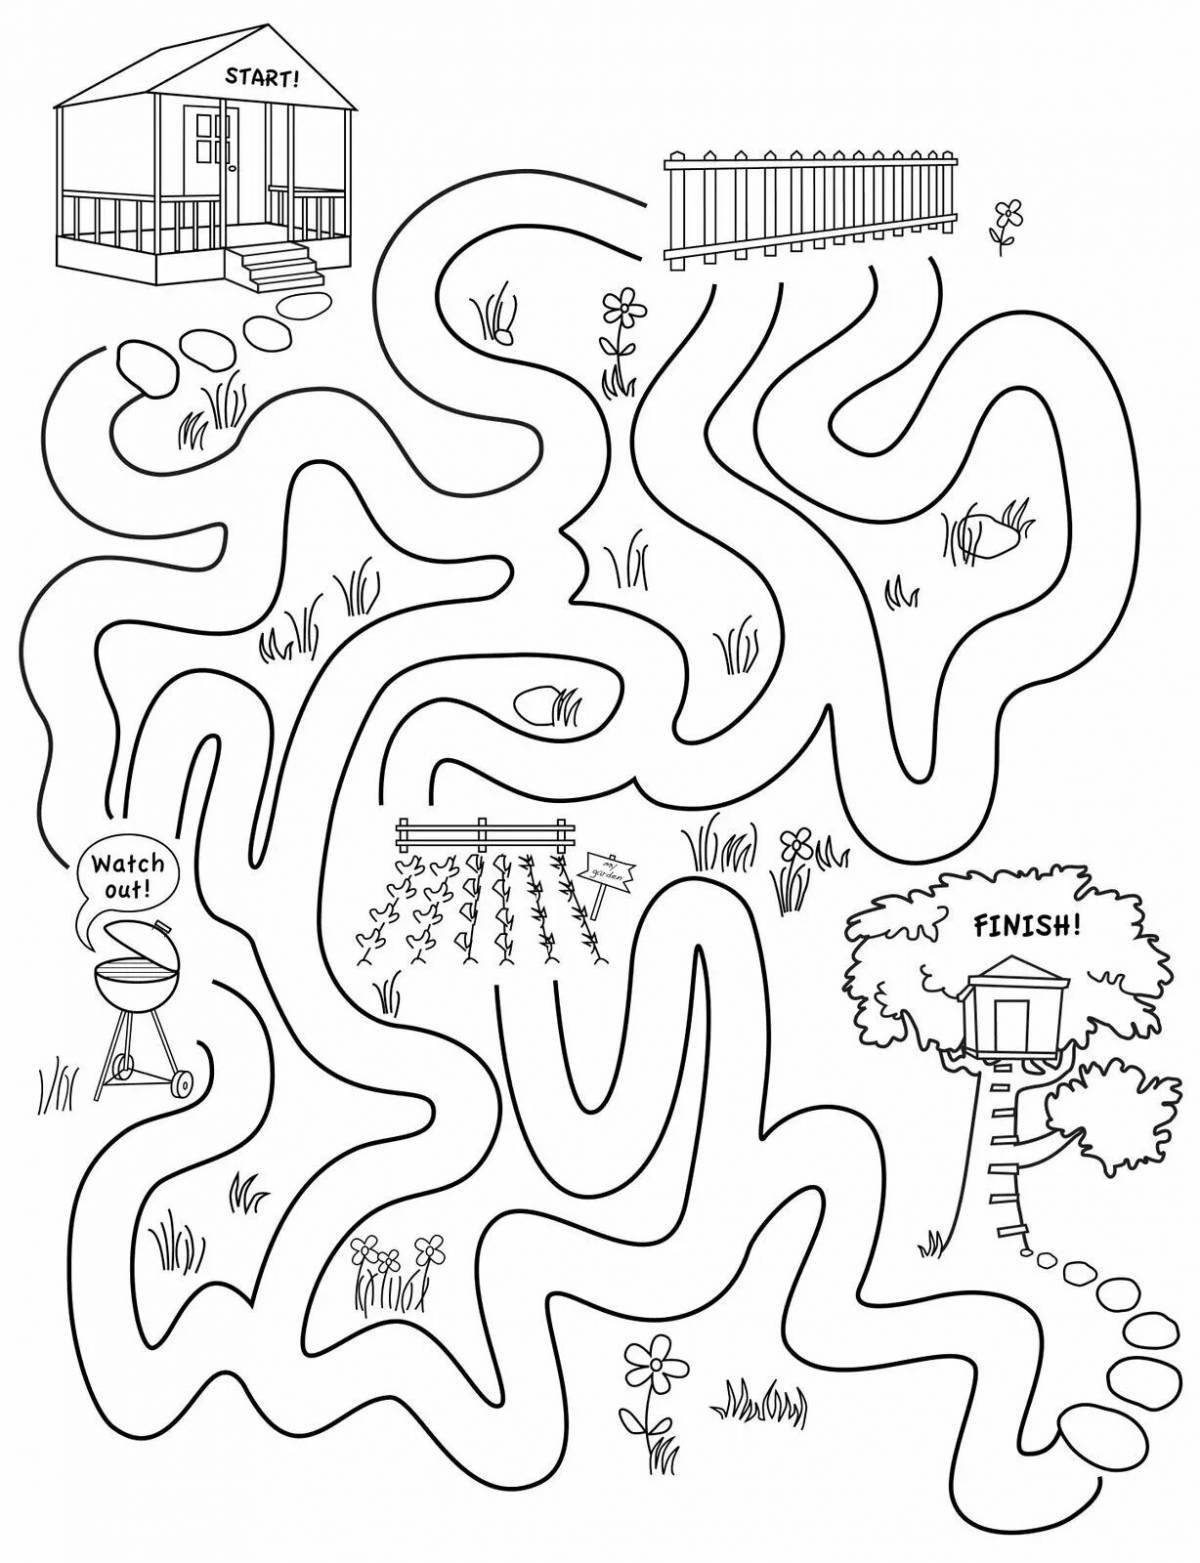 Entertaining coloring maze for children 5-6 years old